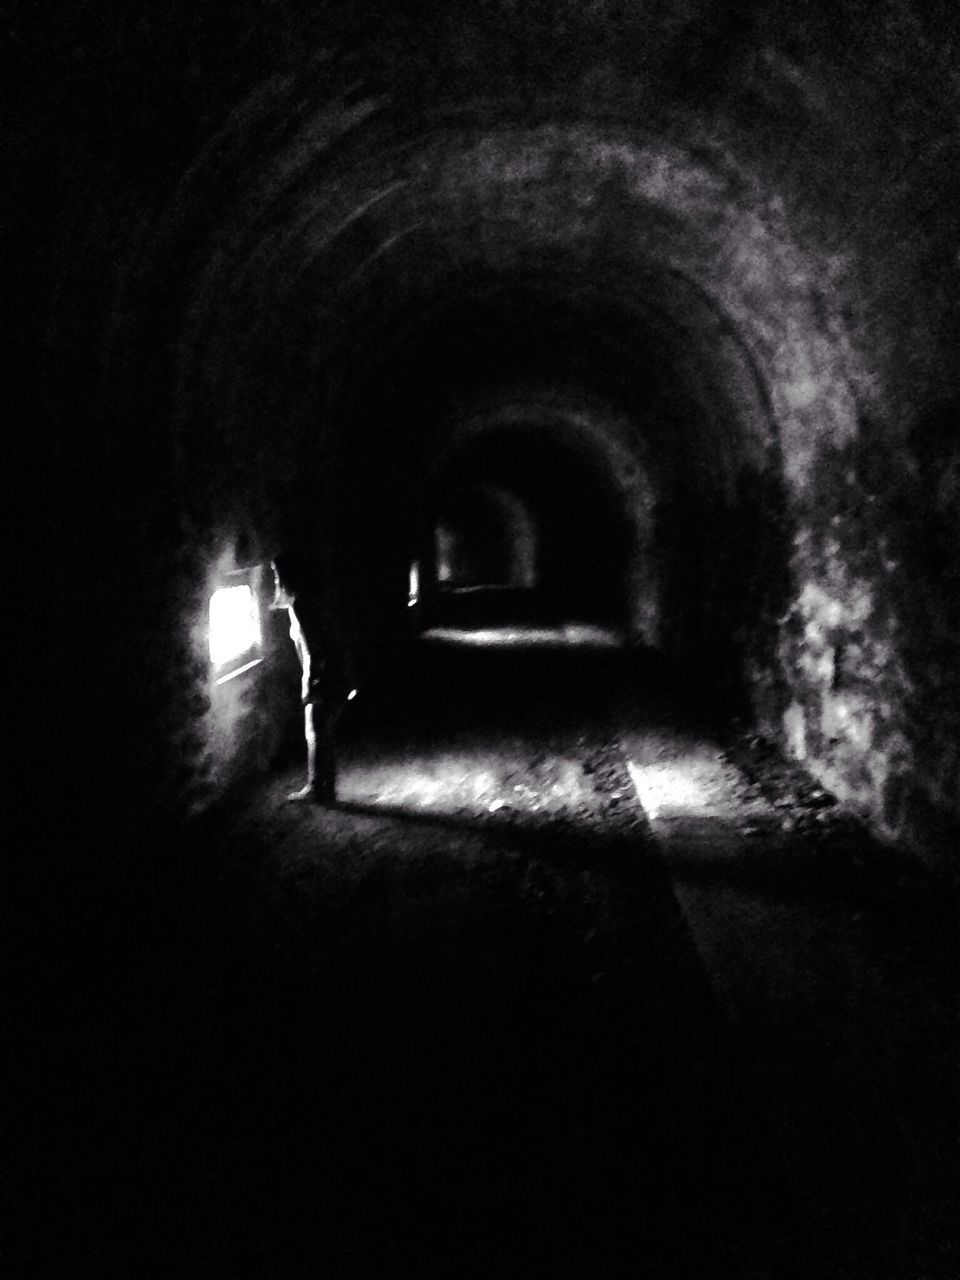 tunnel, lifestyles, full length, men, leisure activity, indoors, walking, rear view, silhouette, arch, the way forward, dark, person, night, illuminated, standing, unrecognizable person